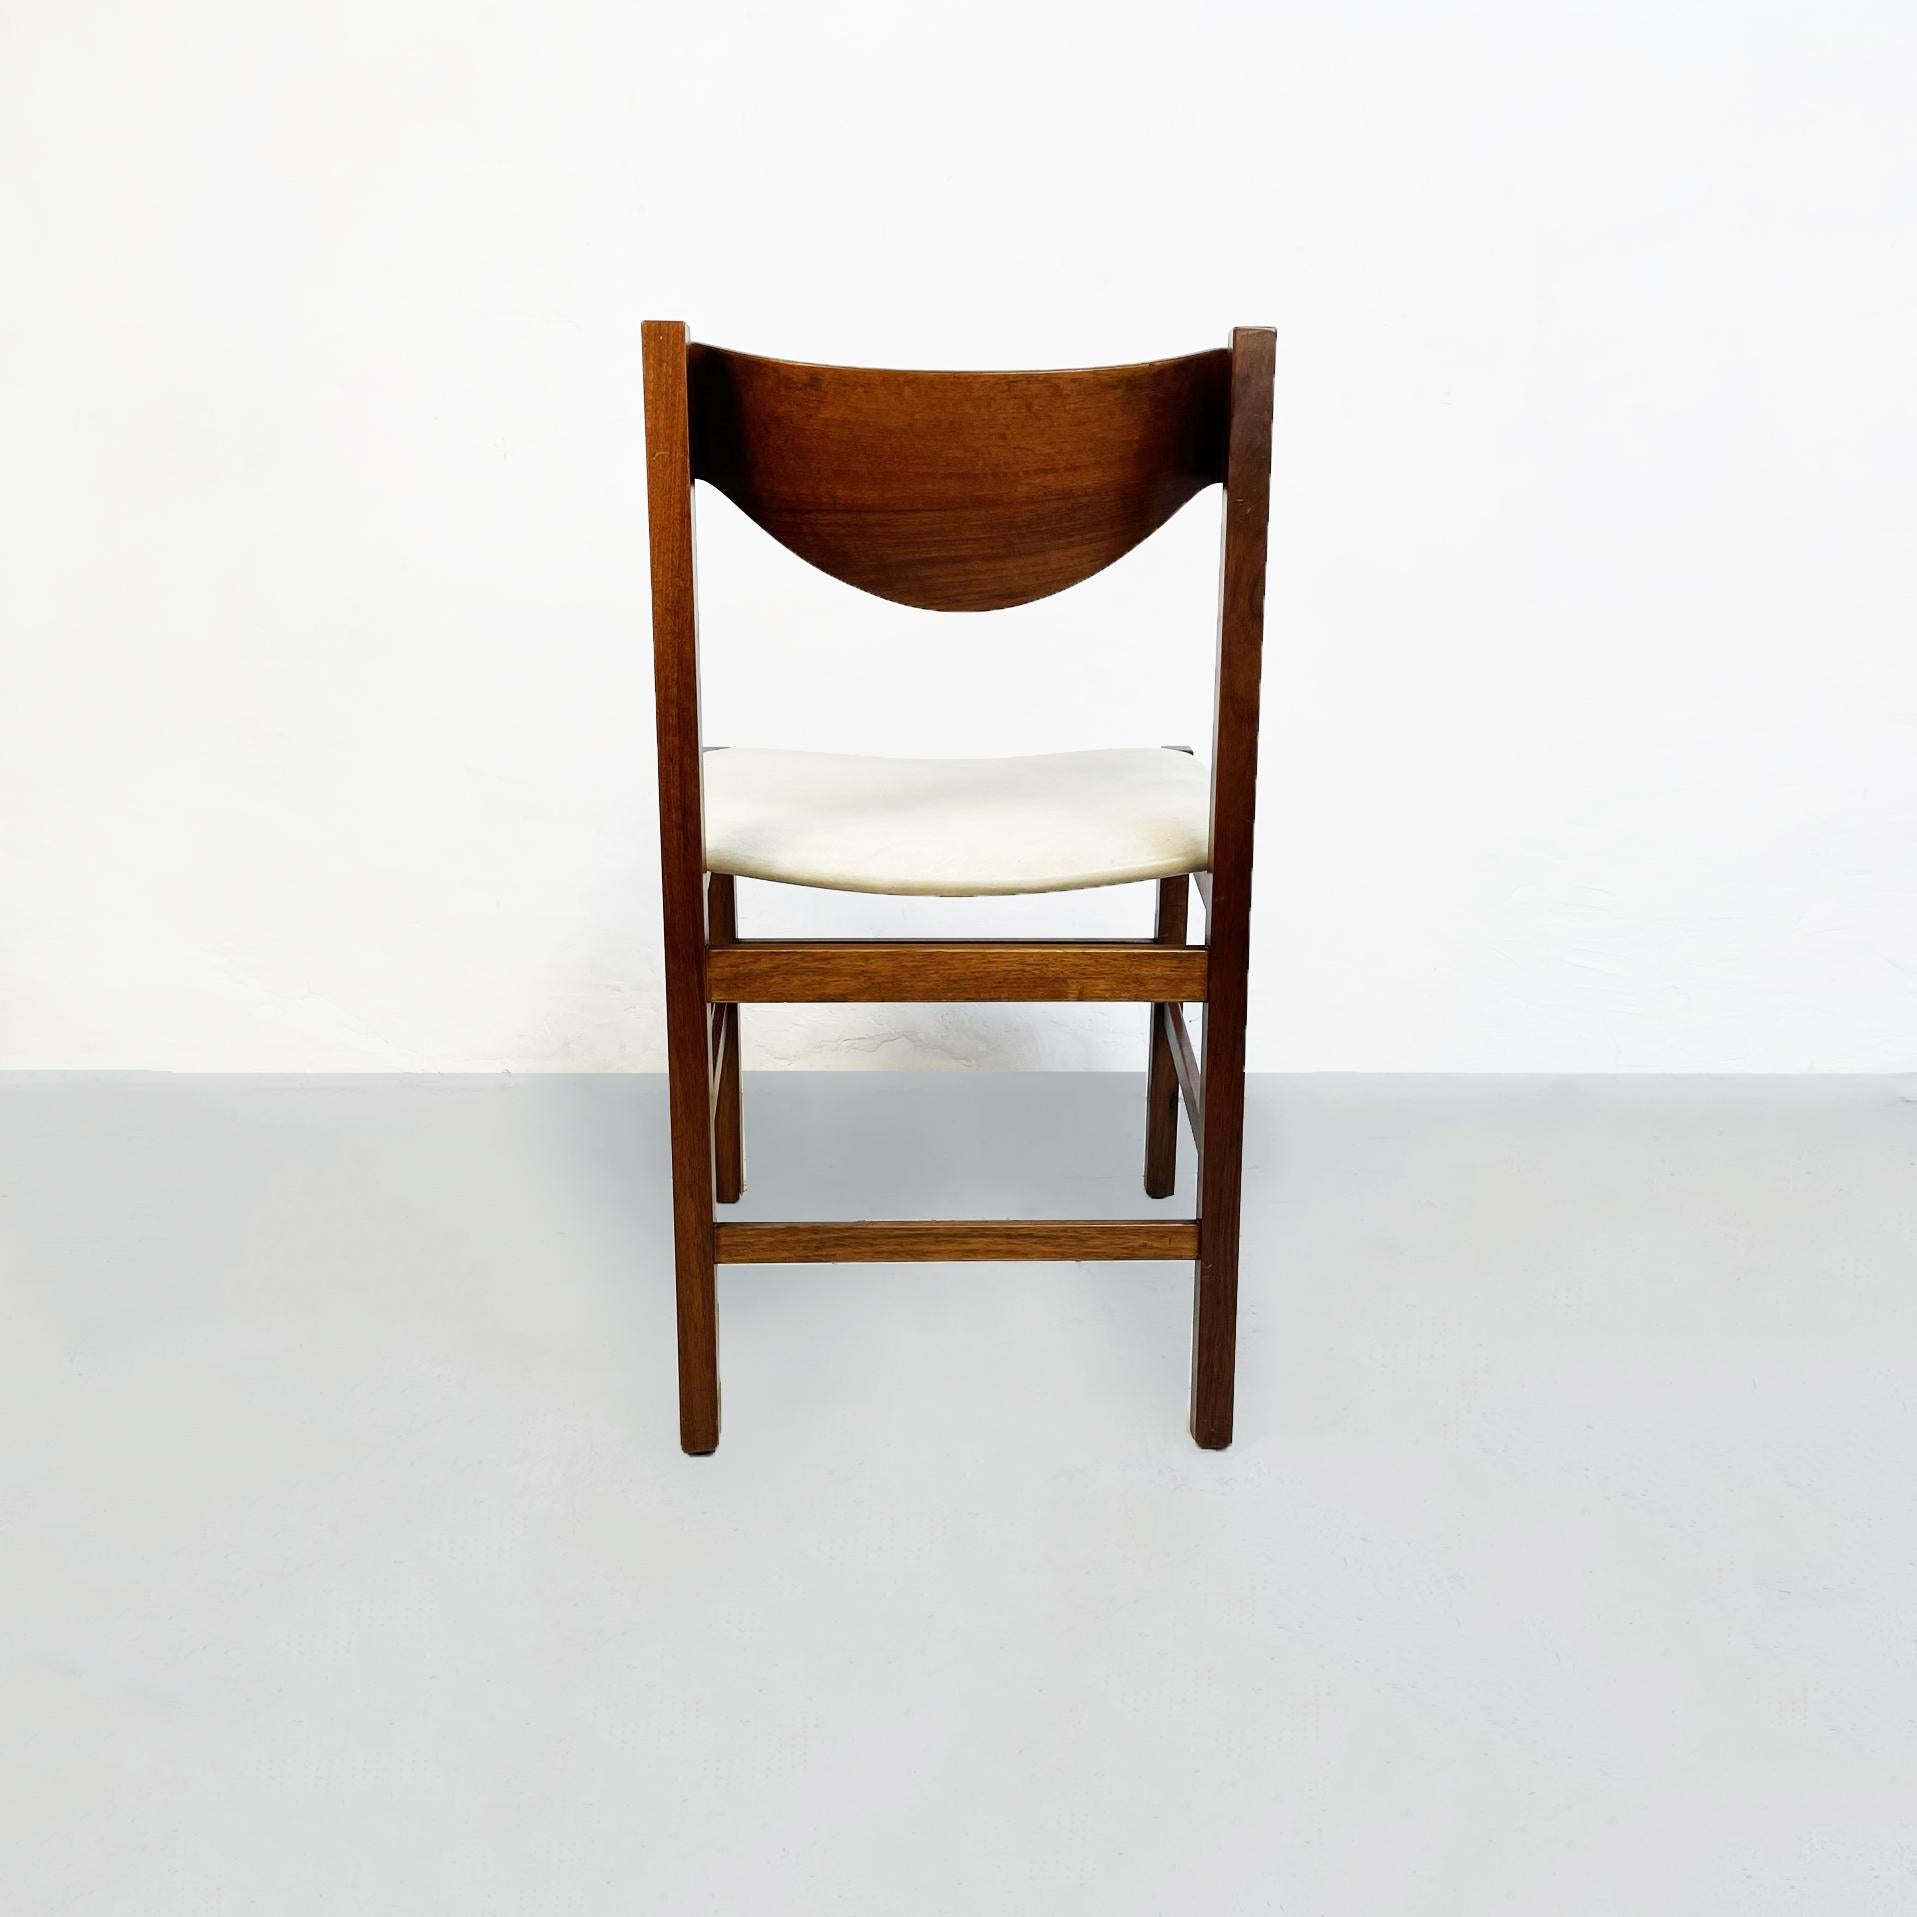 Mid-20th Century Italian Mid-Century Modern Wooden Chair with Leather Square Seat, 1960s For Sale